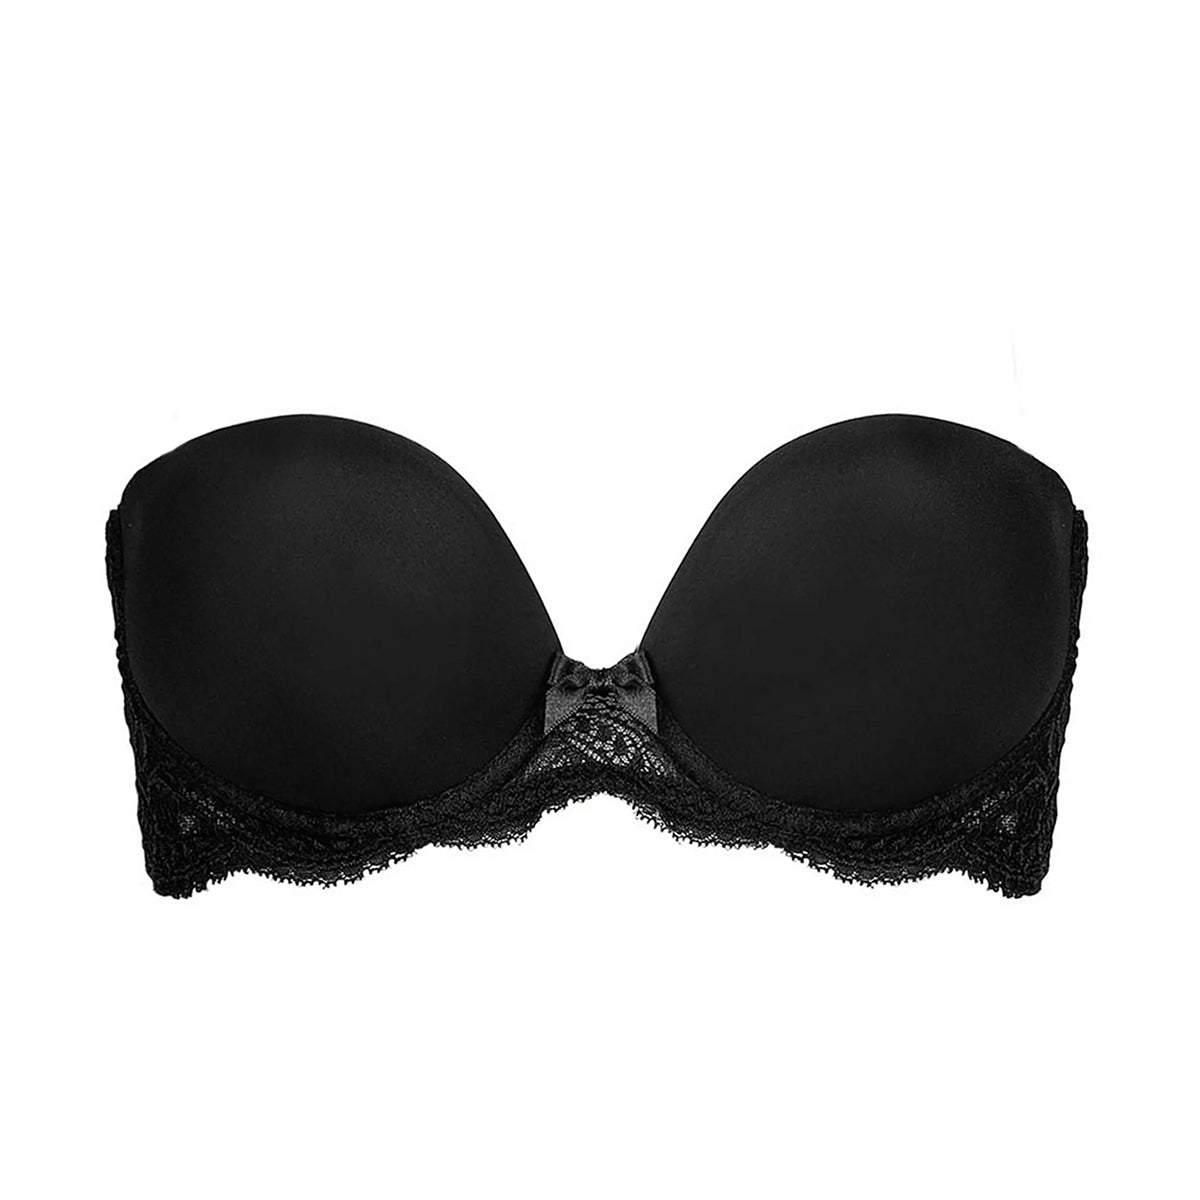 Ultra Thin Double Breasted Push Up Bra Set With Cutout Transparent Lace  Black/White Half Cup And 290L From Geymf, $23.85